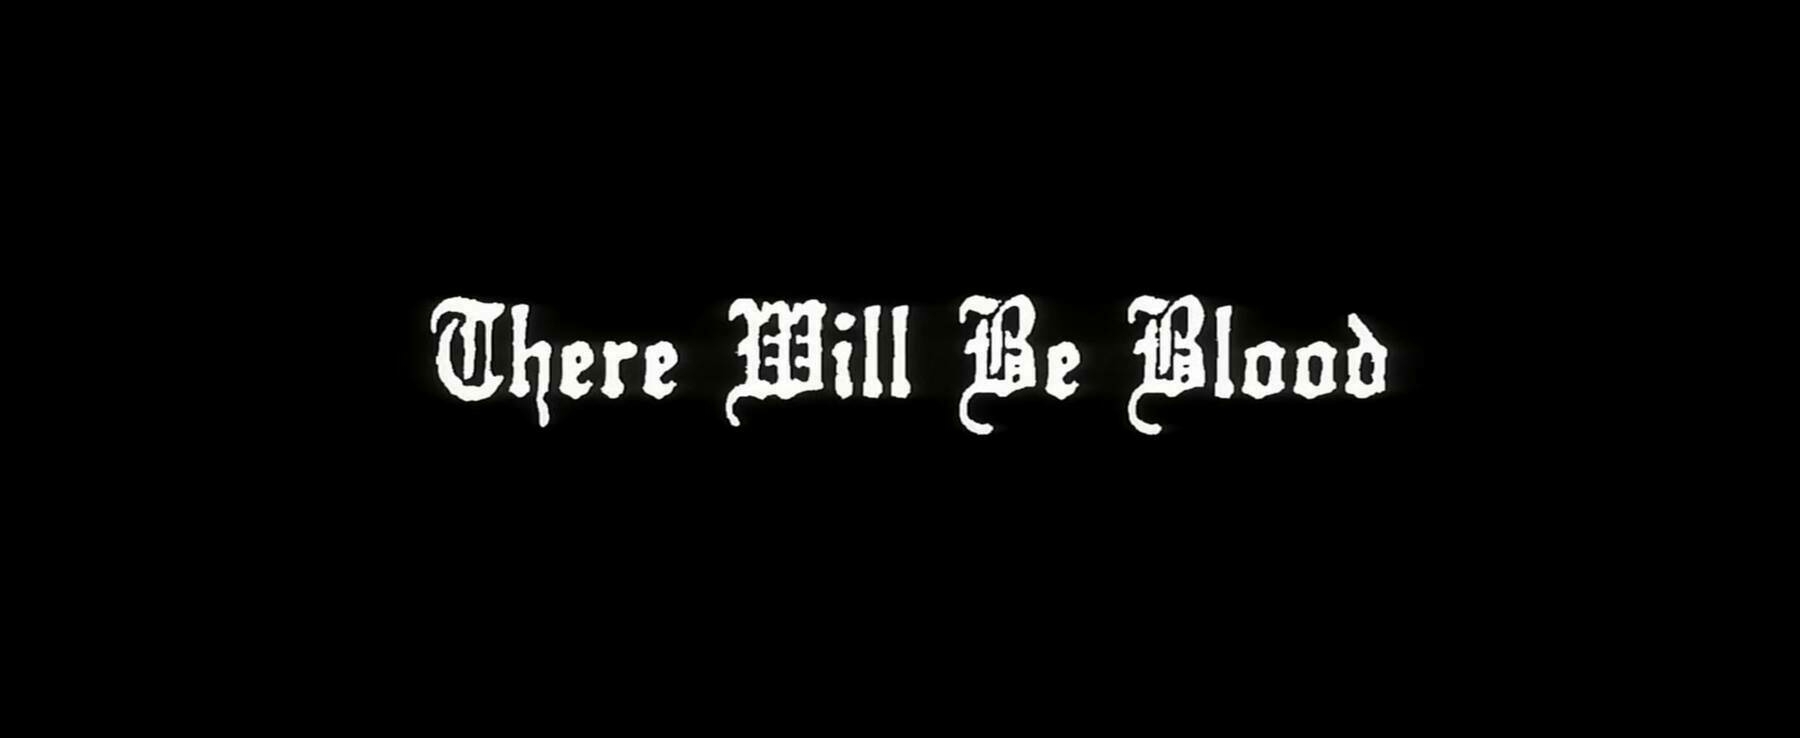 The title card for the film, There Will Be Blood.